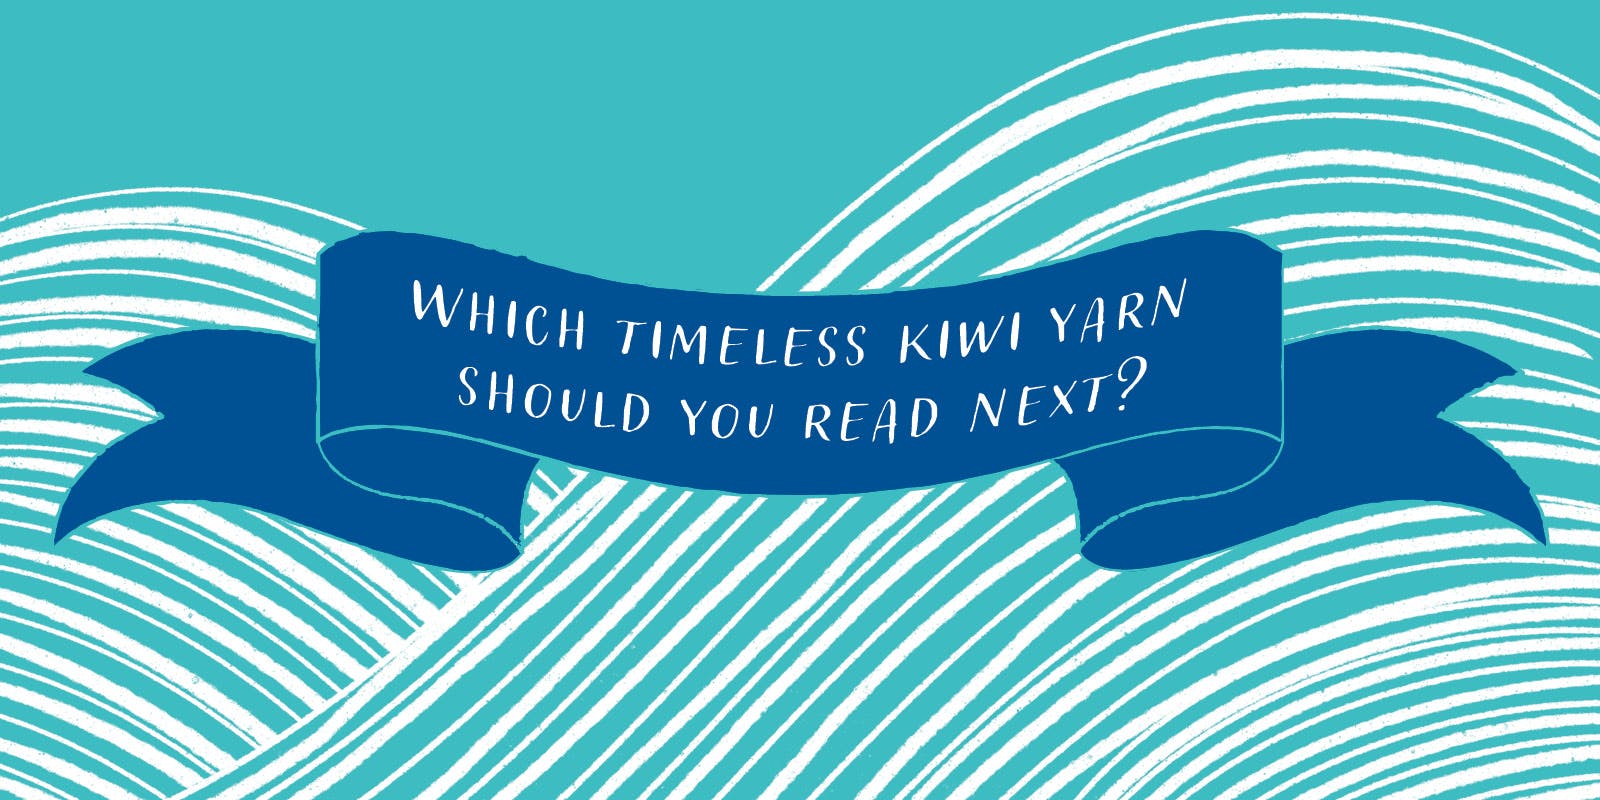 Which timeless Kiwi yarn should you read next? 